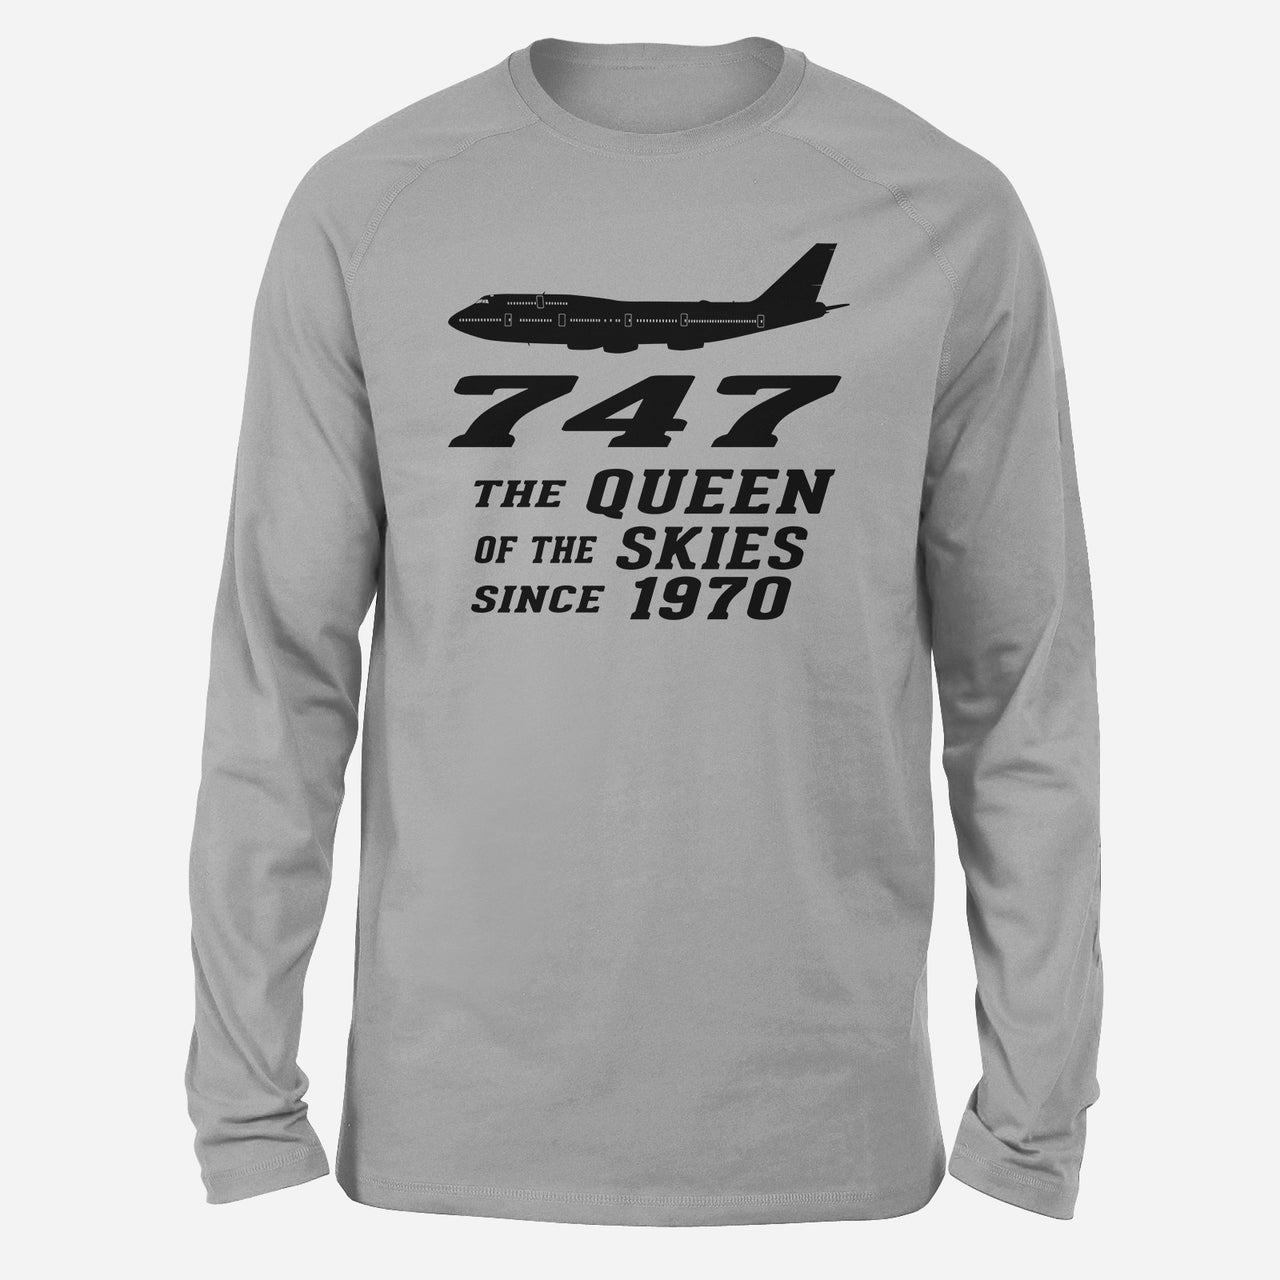 Boeing 747 - Queen of the Skies (2) Designed Designed Long-Sleeve T-Shirts